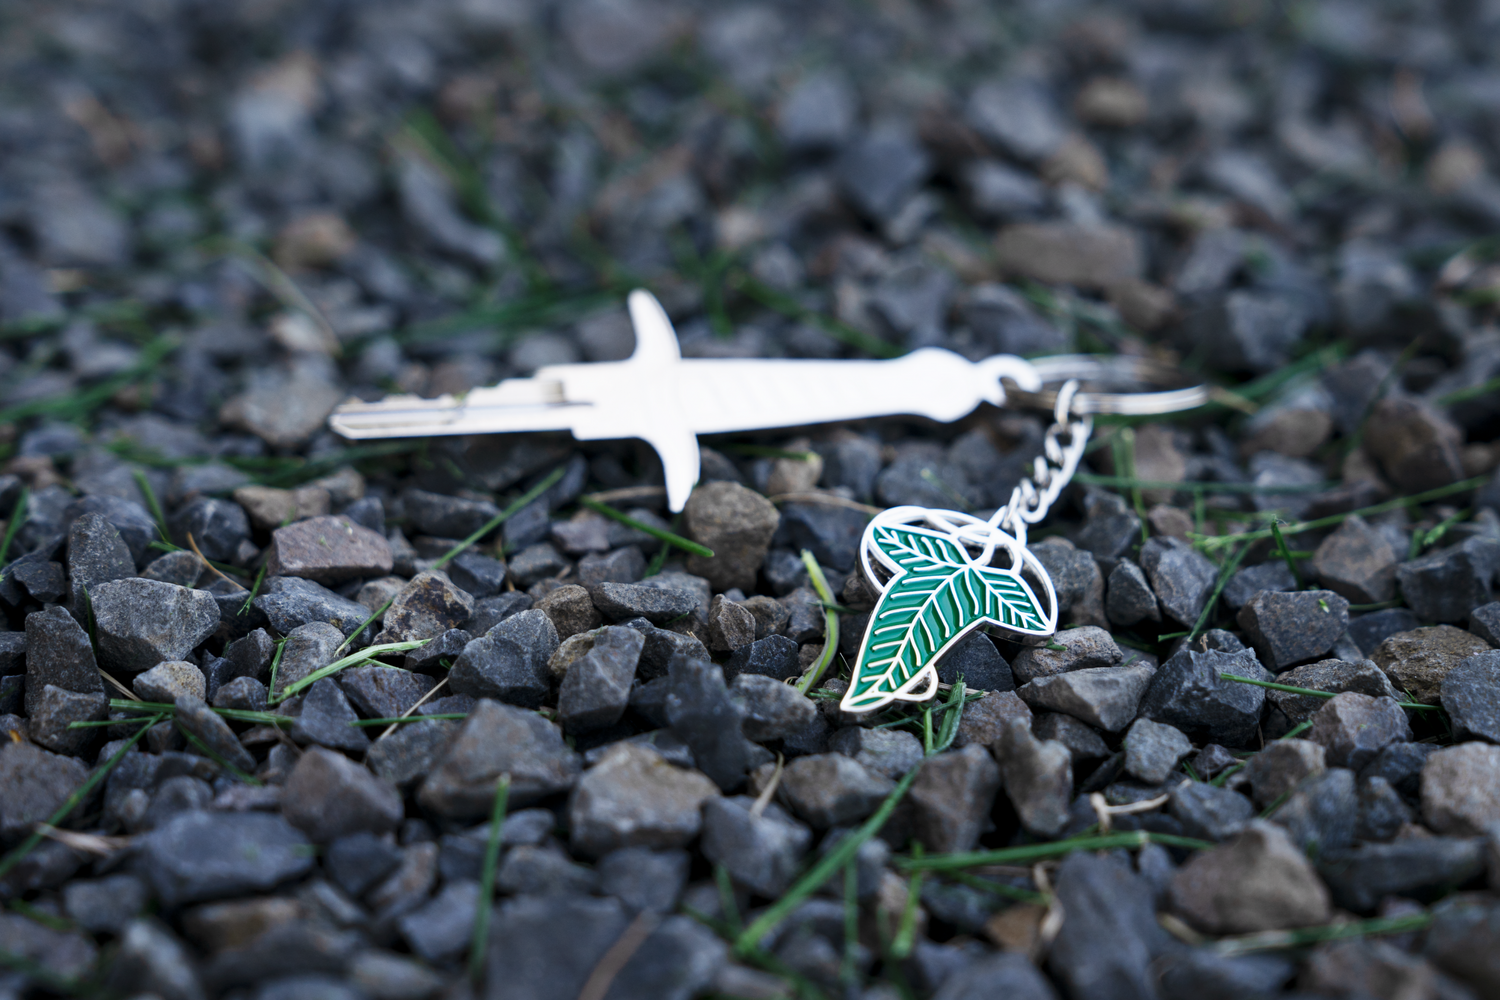 A silver house key attached to a green leaf keychain on top of a pile of pebbles